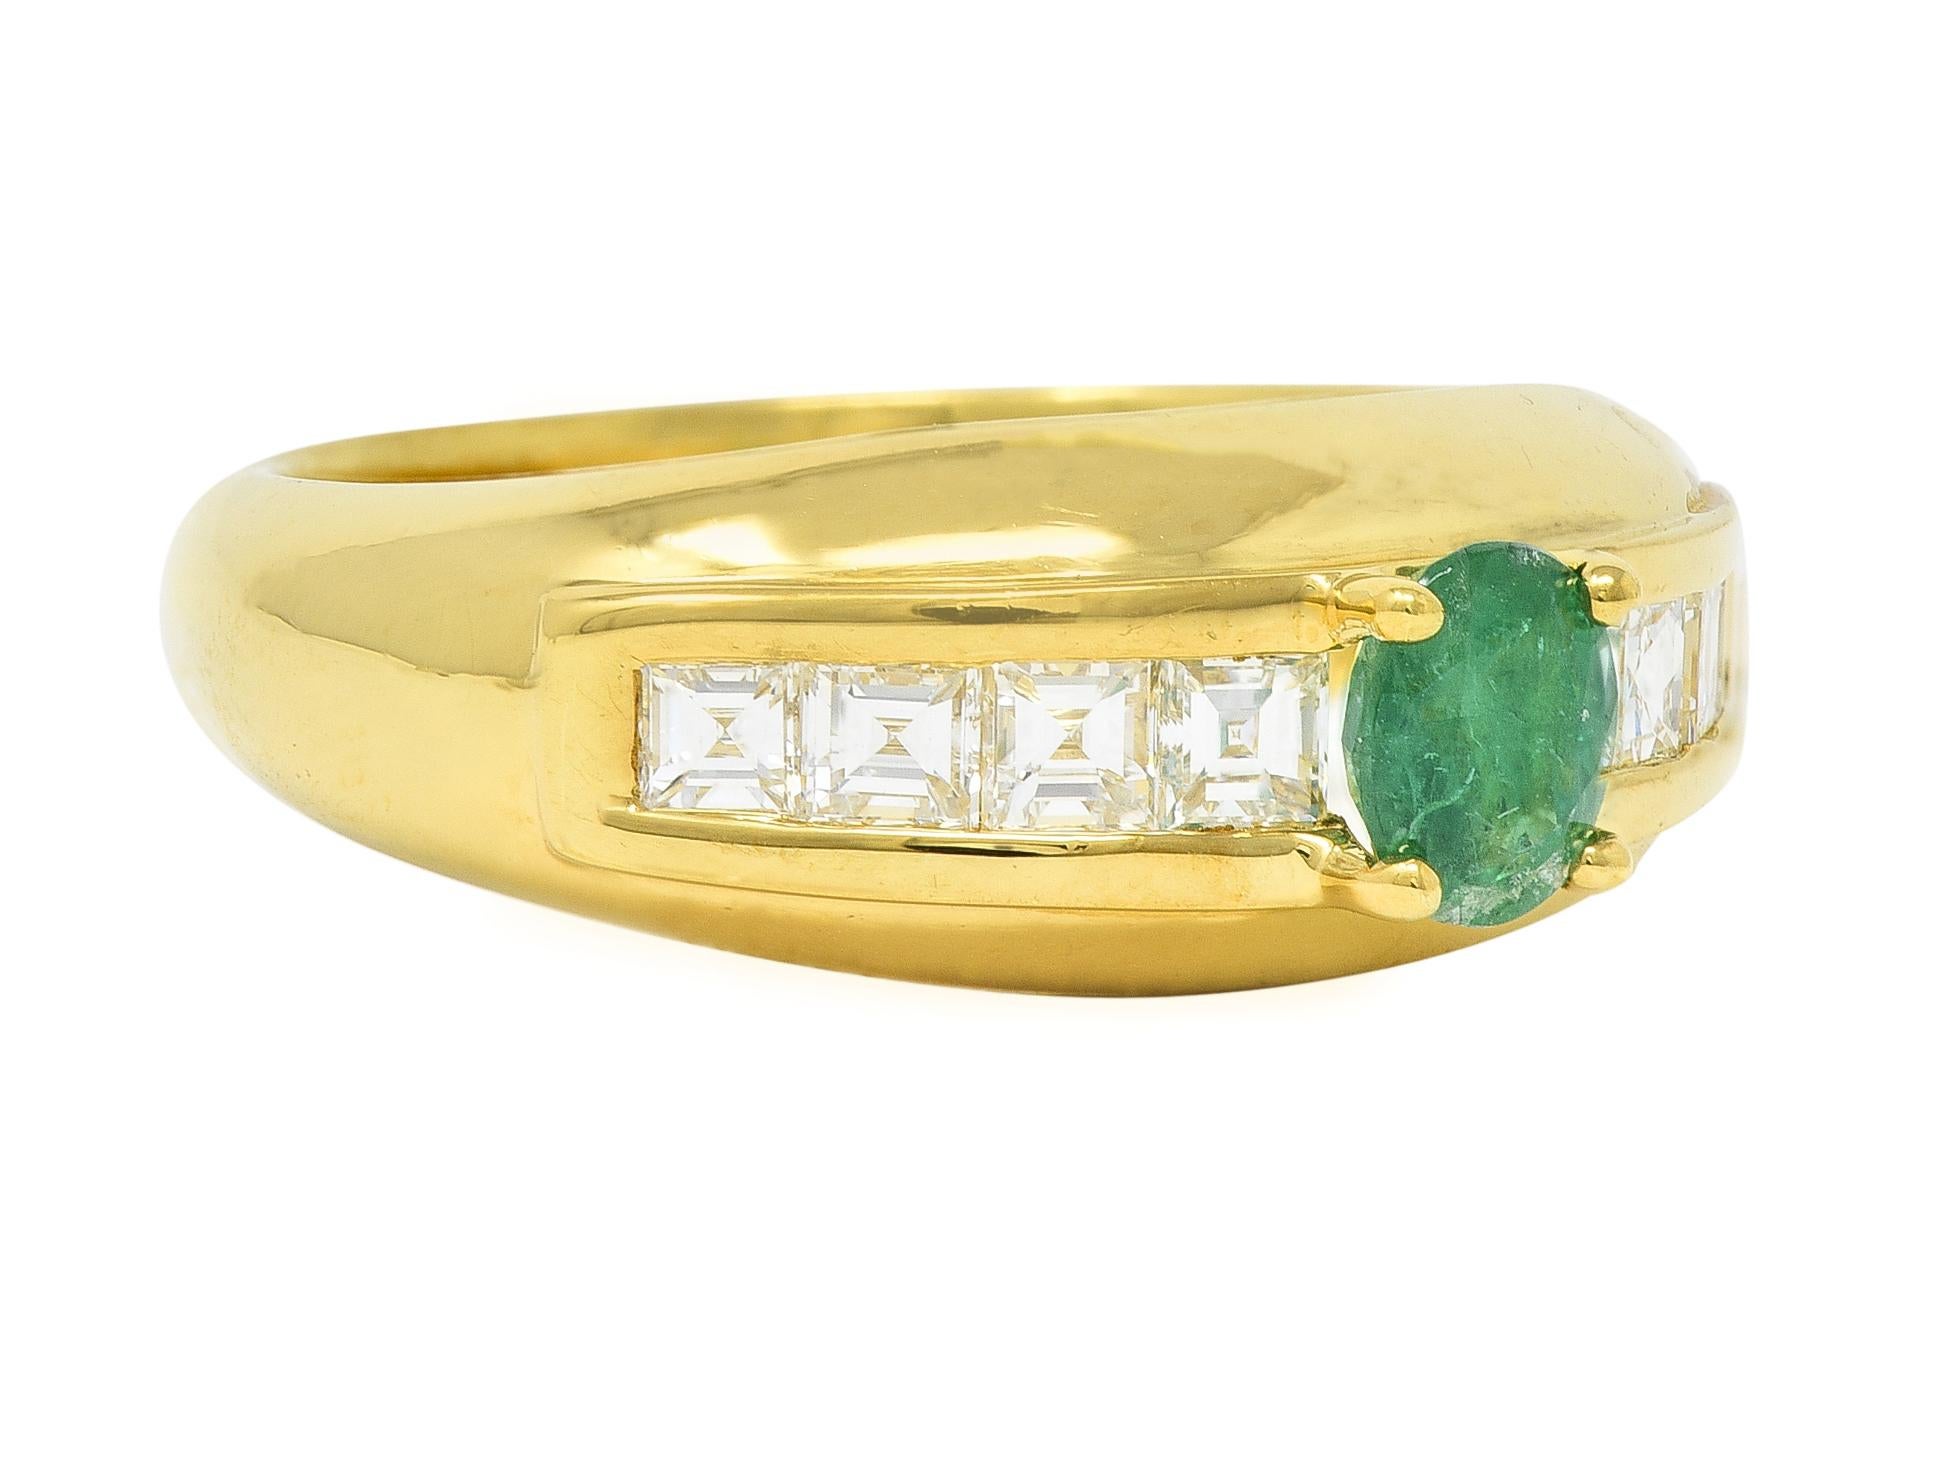 Centering an oval cut emerald weighing 0.38 carat total 
Transparent medium green in color - prong set
Flanked by rows of square step-cut diamonds 
Channel set and weighing 0.62 carat total 
G/H color with VS2 clarity
Completed by high polish